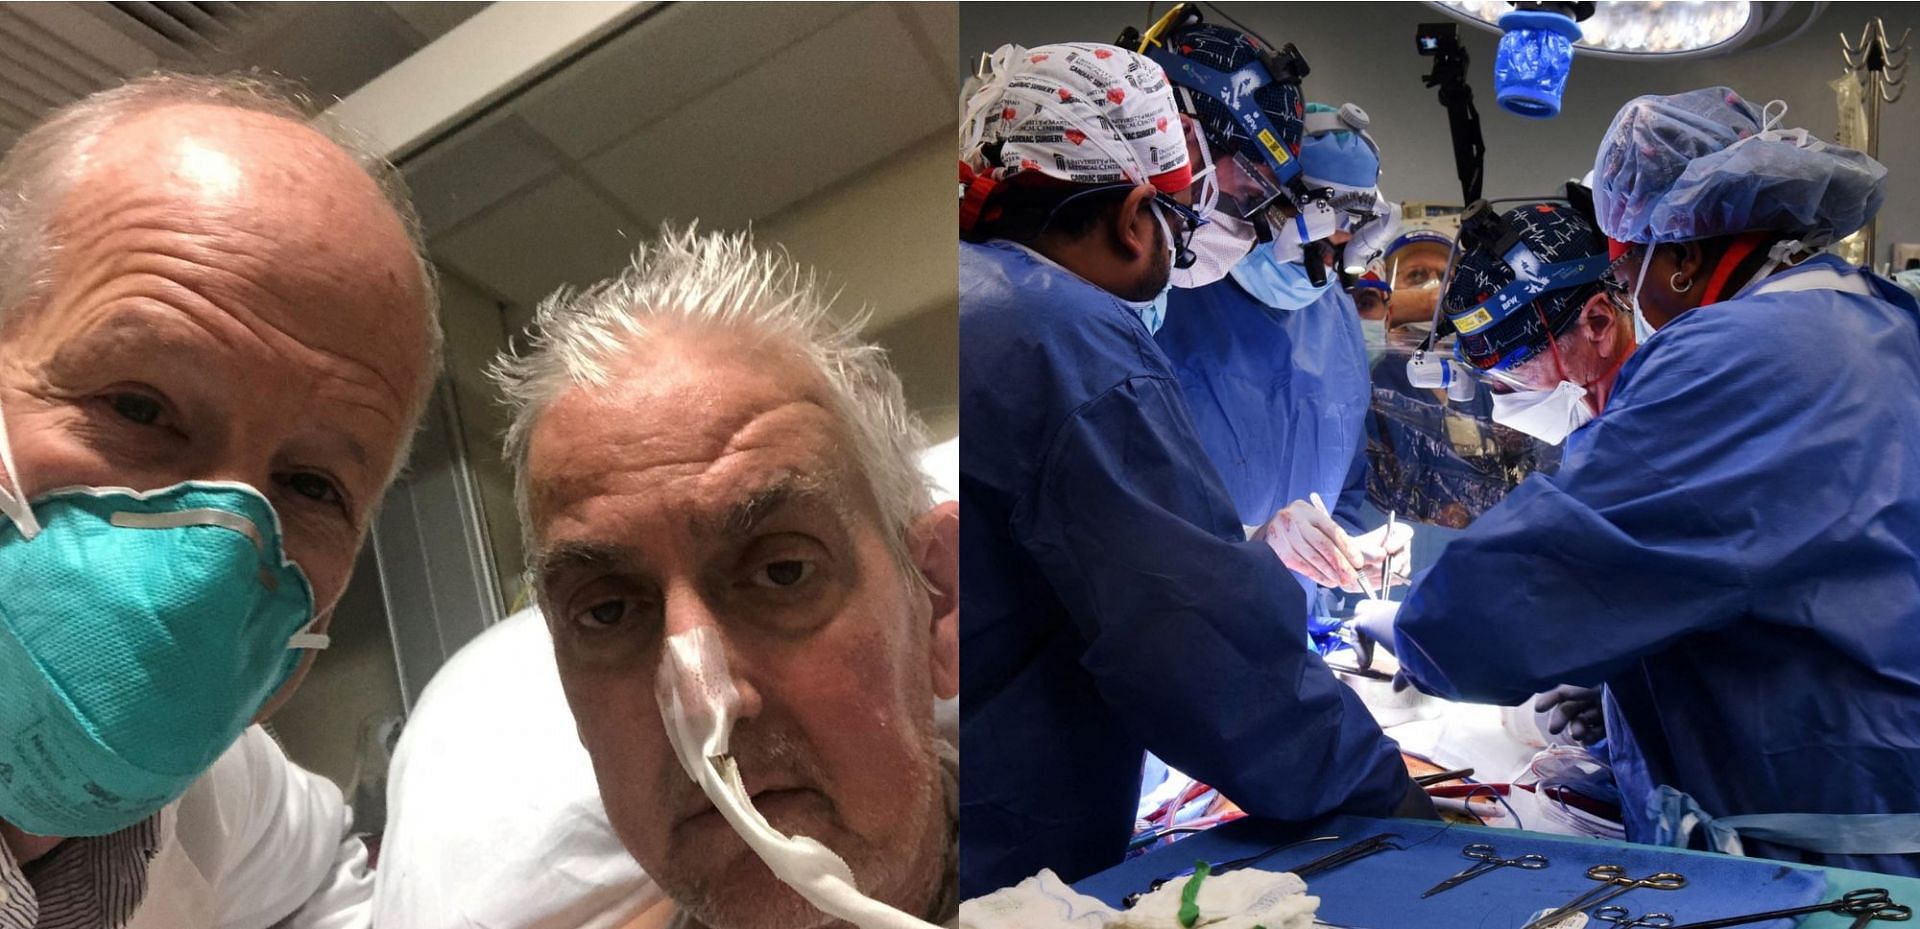 David Bennett underwent a historic heart transplant surgery and received the organ from a pig (Image via University of Maryland Medical Center)